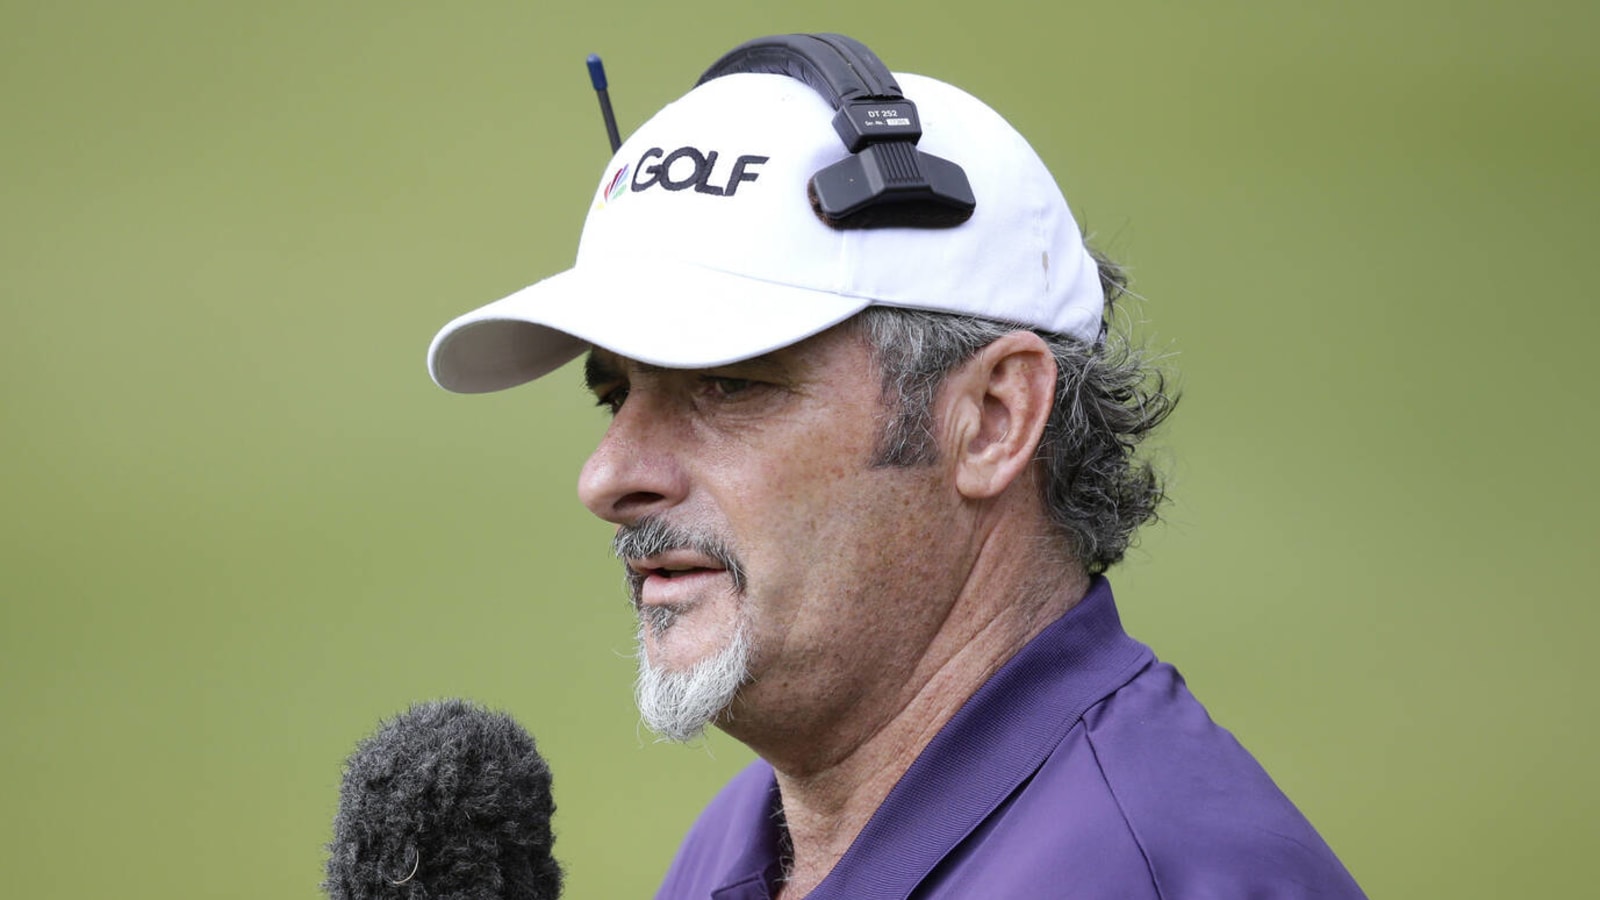 Report: David Feherty to become LIV Golf analyst